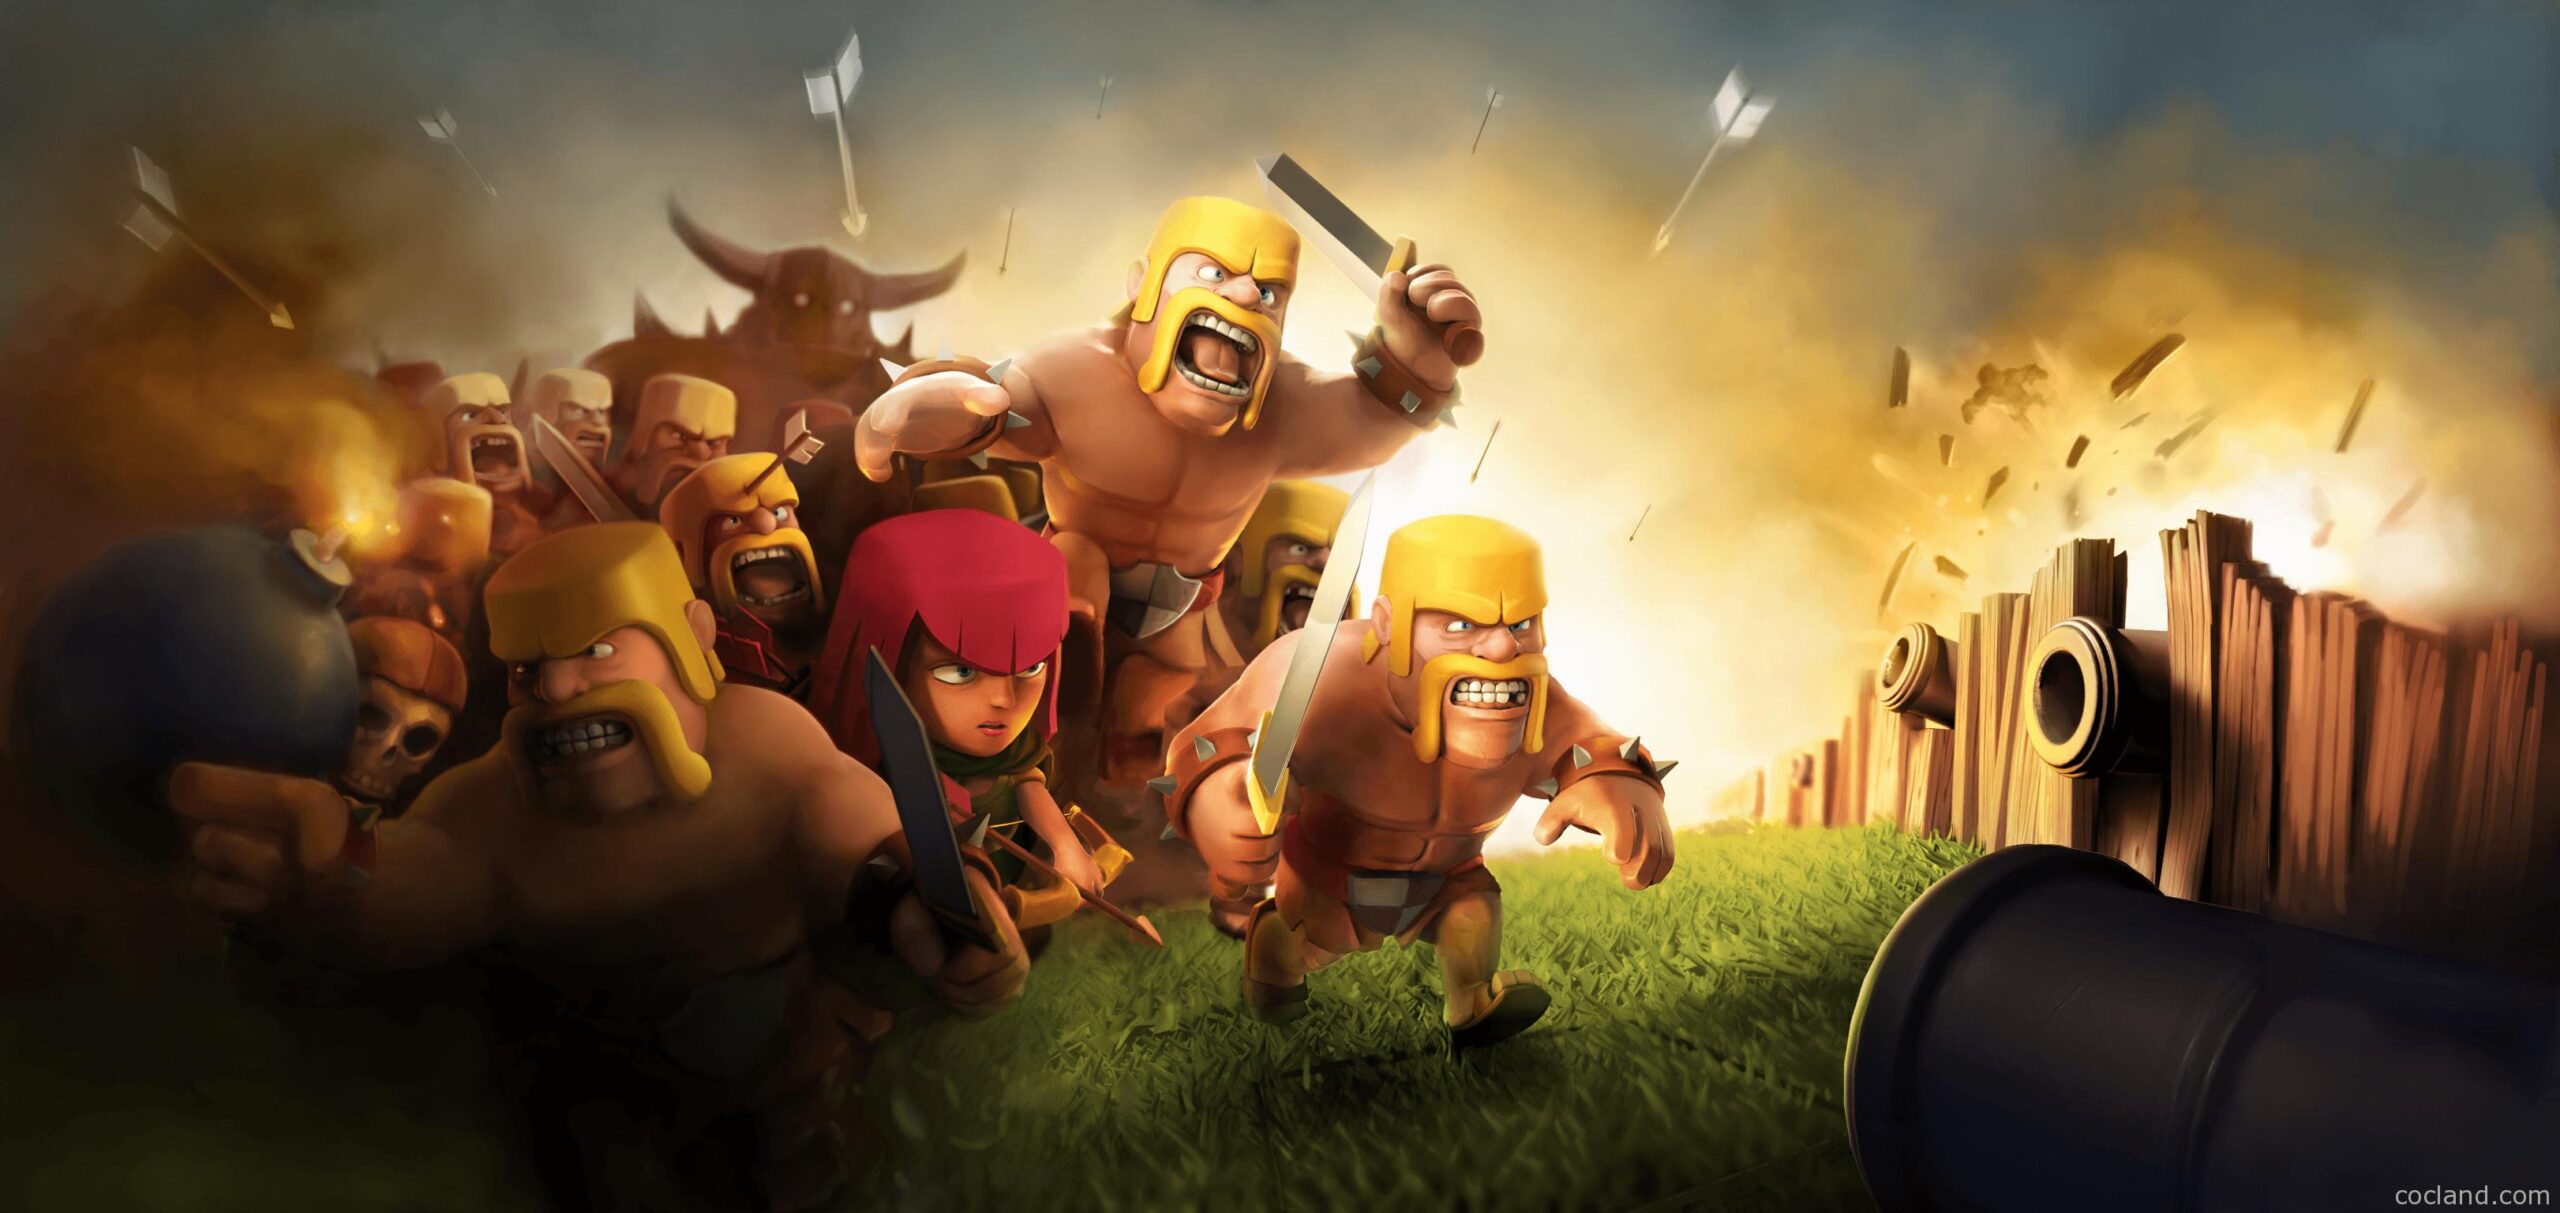 Clash Of Clans Wallpaper